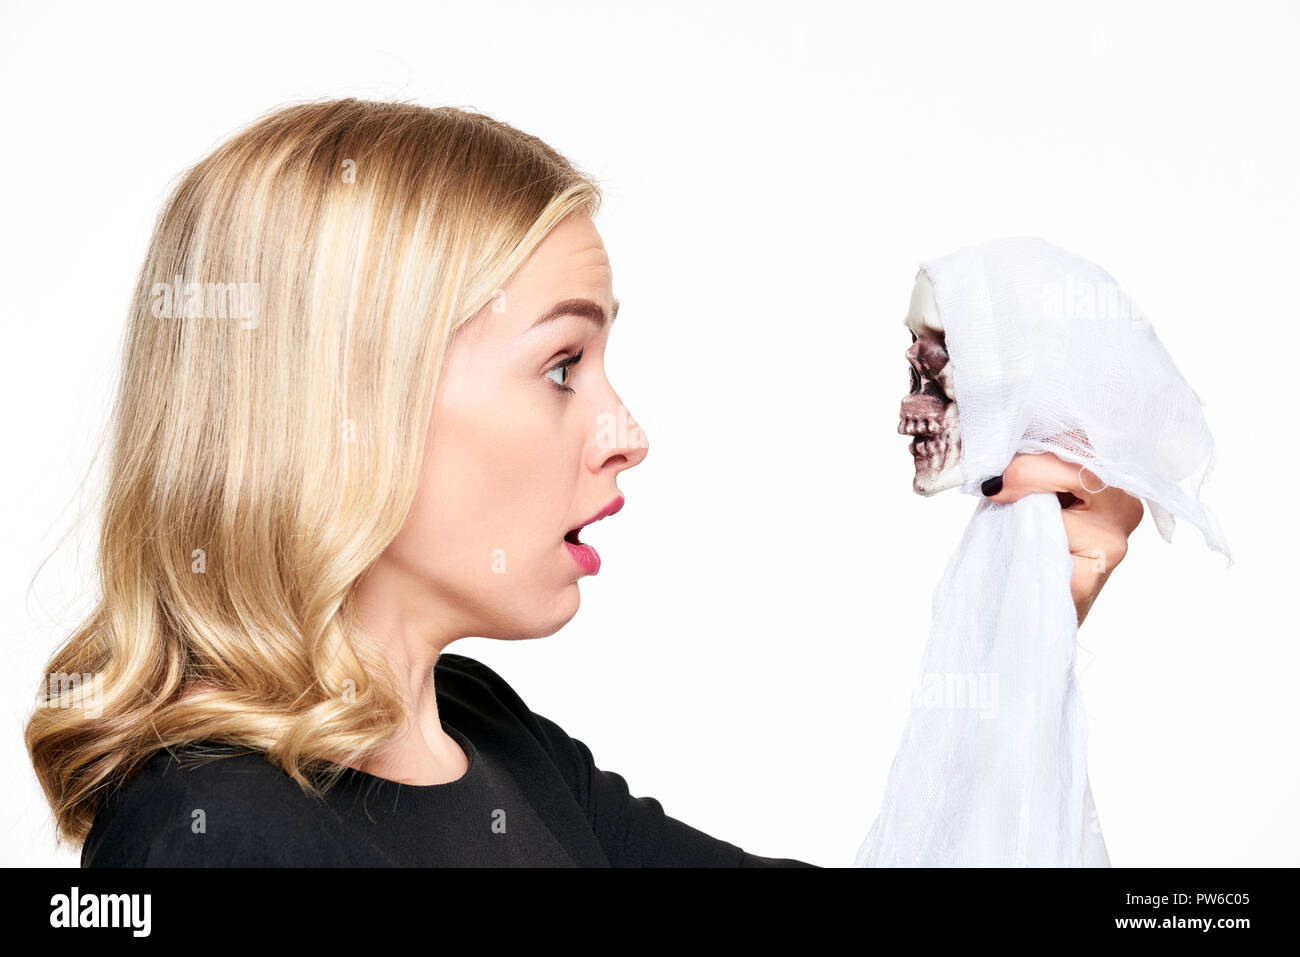 Shocked young woman face to face with Halloween skeleton death decoration. Halloween concept over white background. Stock Photo